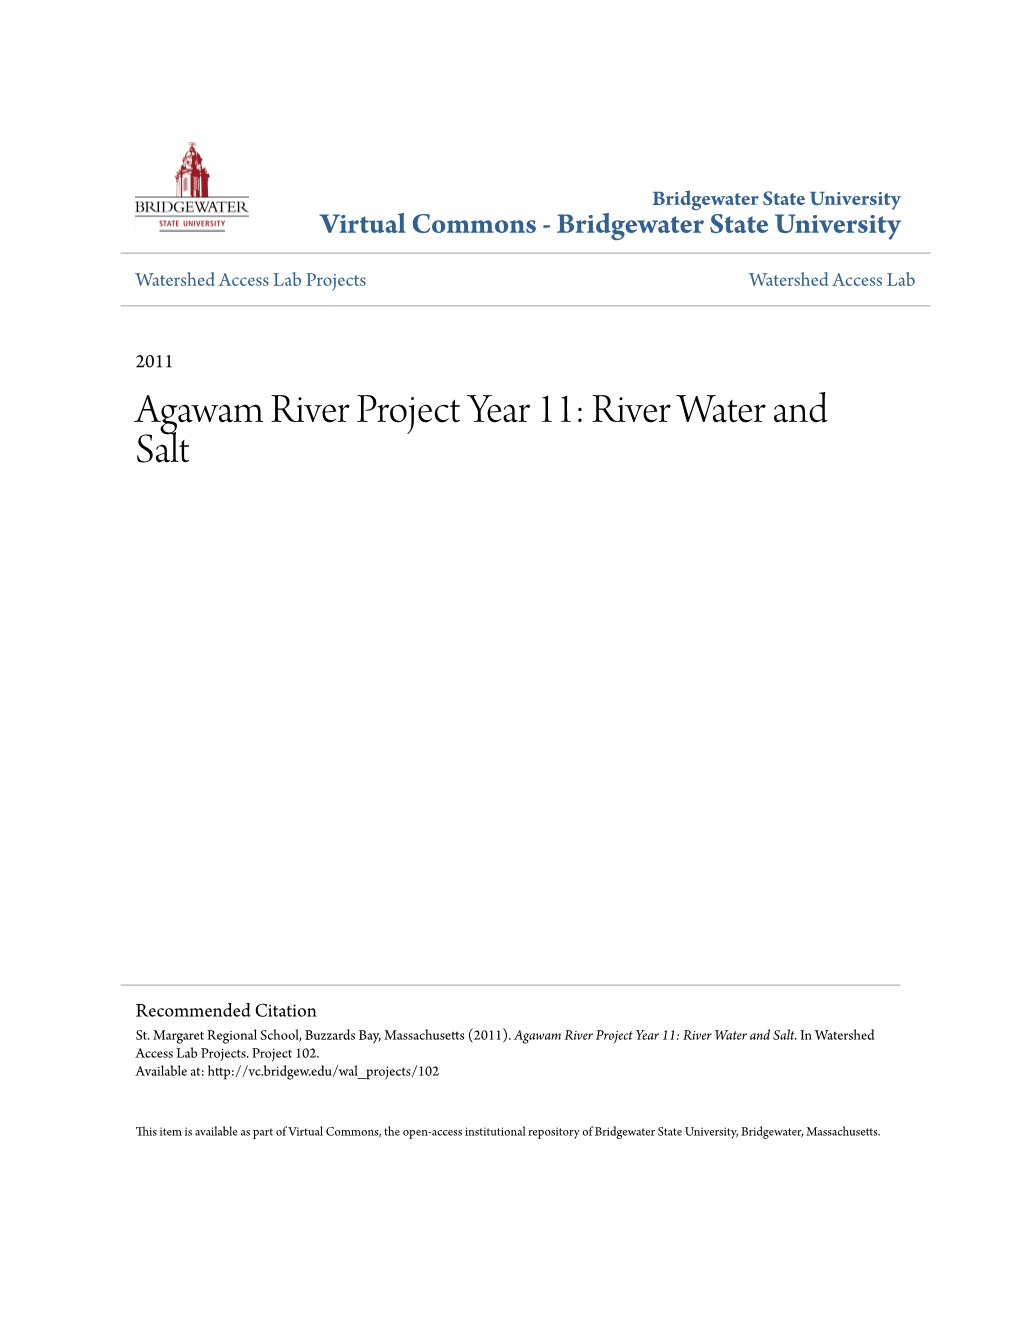 Agawam River Project Year 11: River Water and Salt